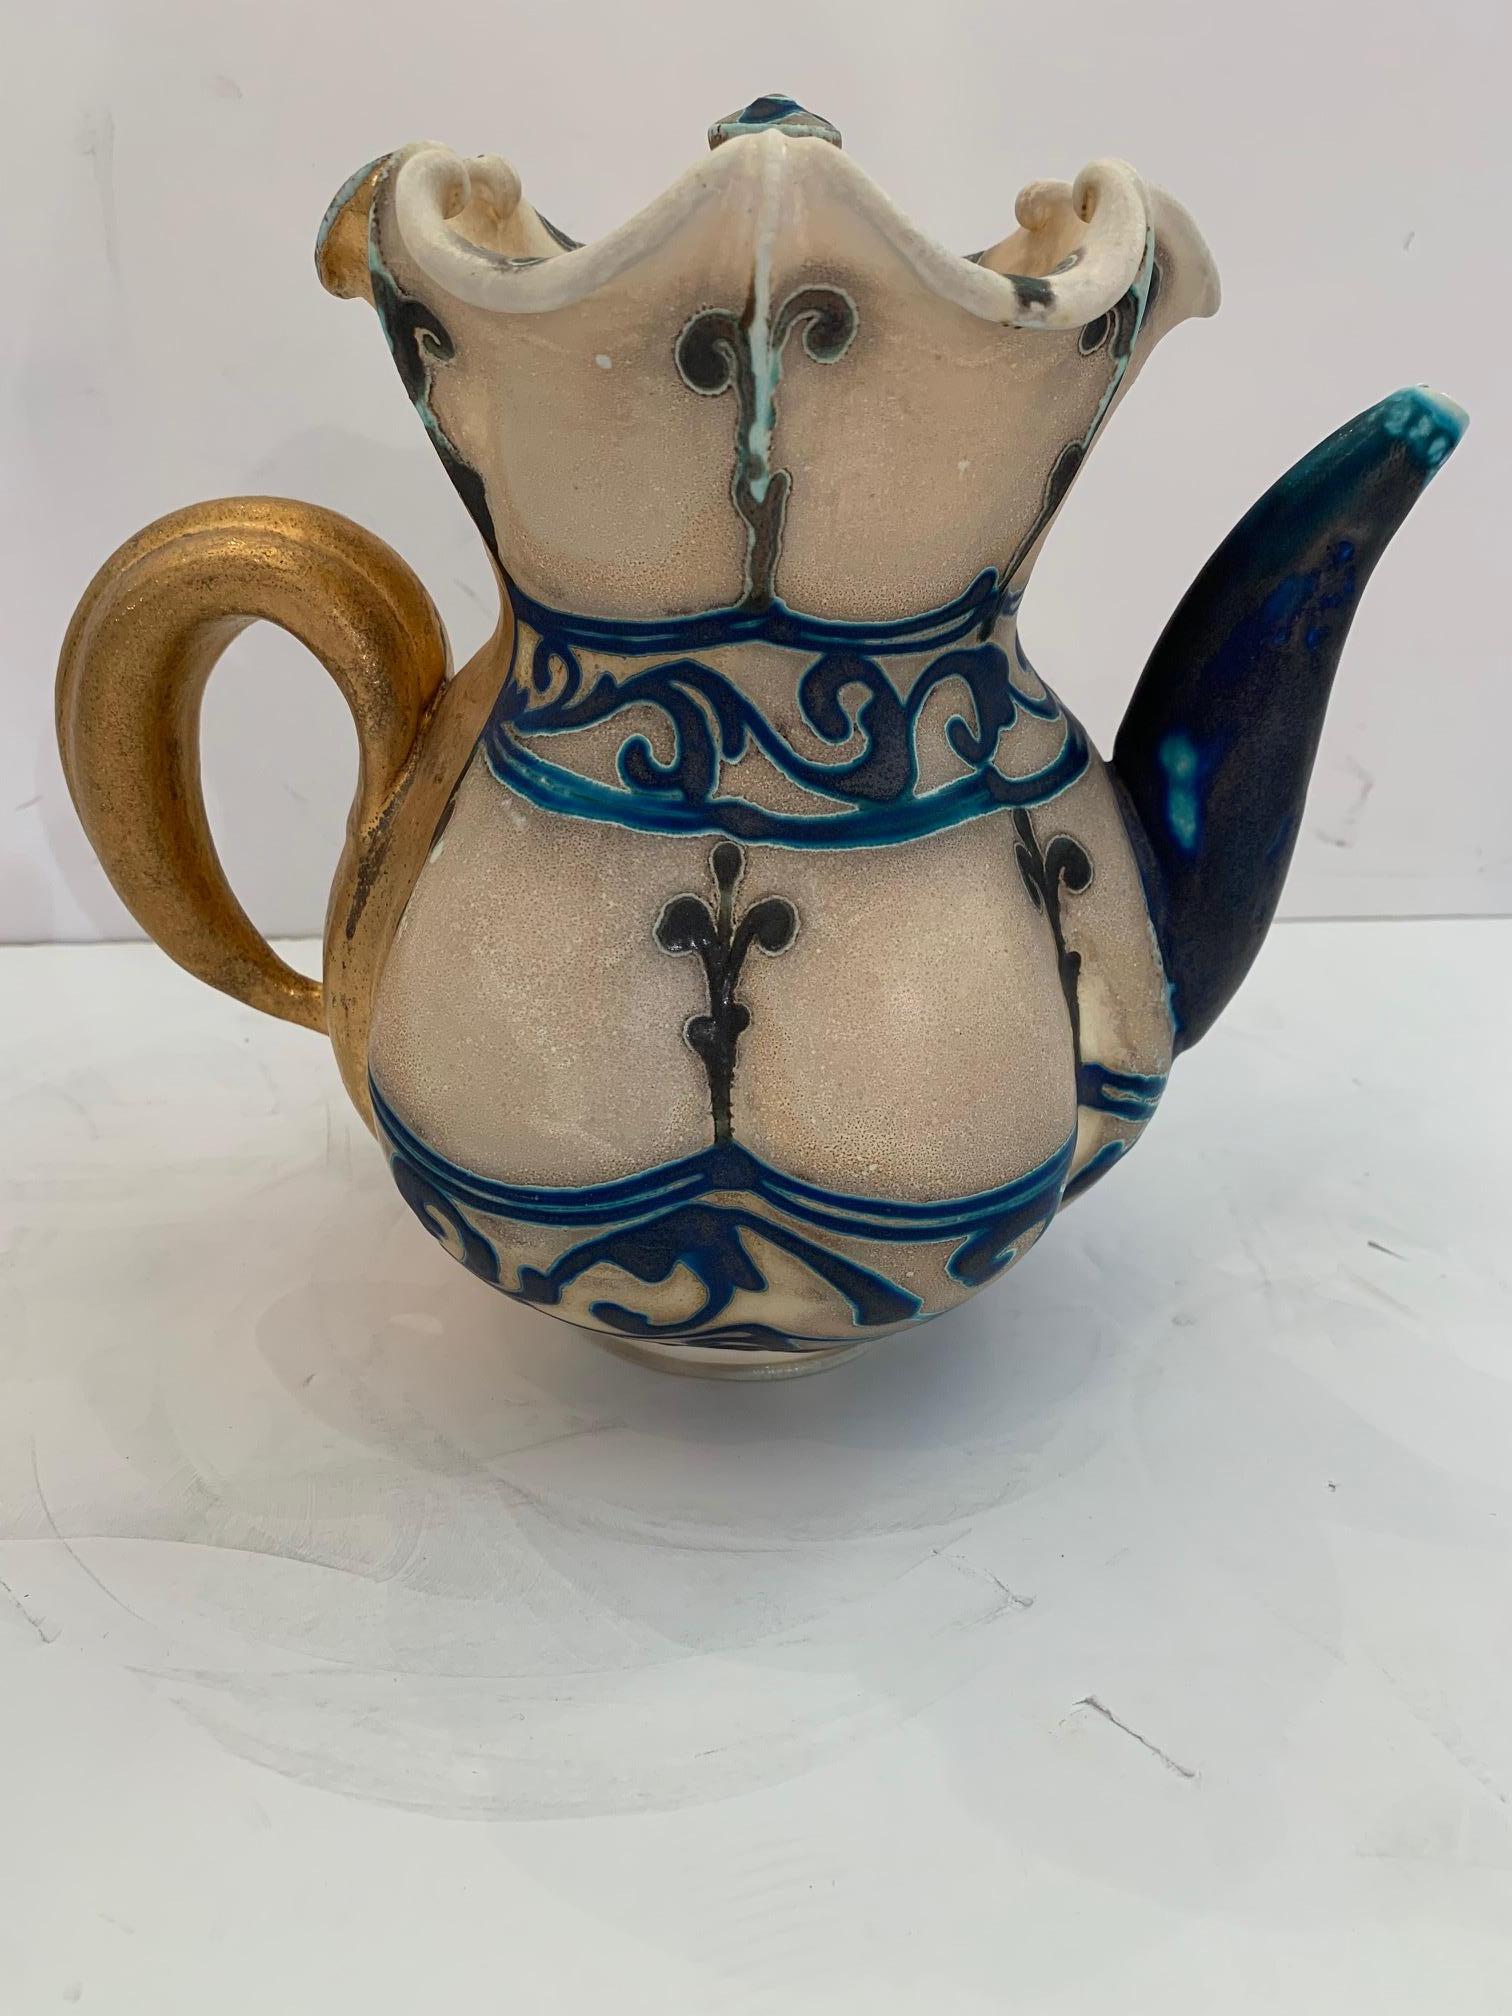 A beautiful original tea pot with lid and 2 pouring vessels and saucers by Julia Galloway Pottery, Montana.
Measures: Pitcher 10.5 W x 9 H x 7 D
Cup 5.75 W x 4 H x 4.25 D
7.5 diameter saucer 1.5 height.

 